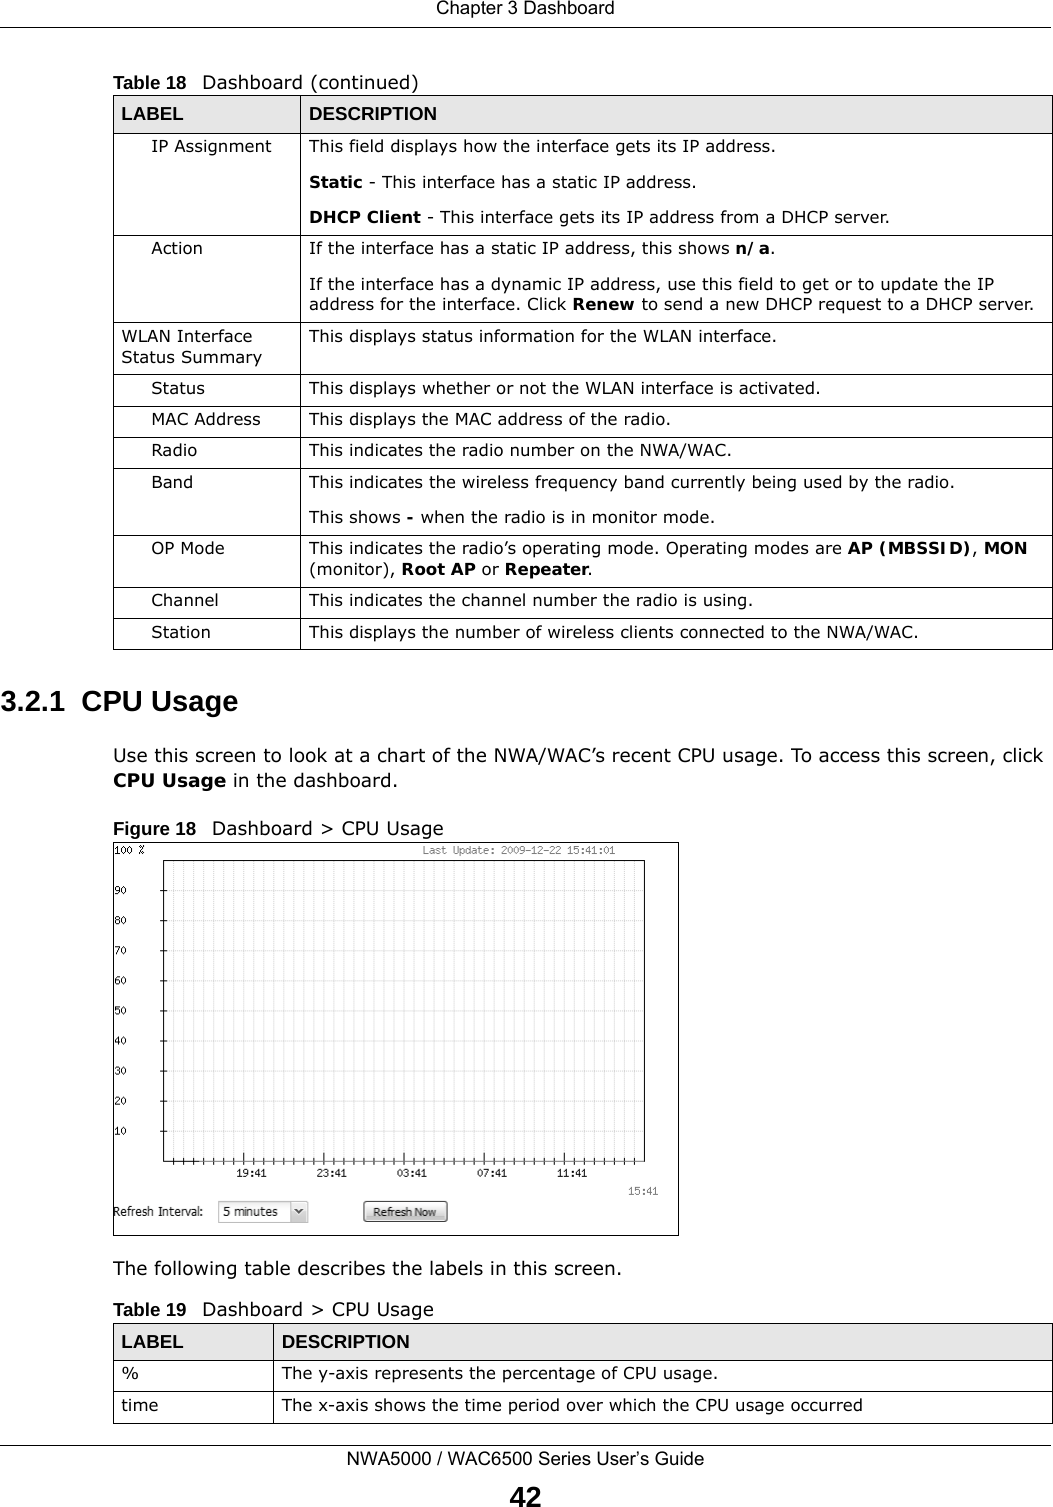 Chapter 3 DashboardNWA5000 / WAC6500 Series User’s Guide423.2.1  CPU UsageUse this screen to look at a chart of the NWA/WAC’s recent CPU usage. To access this screen, click CPU Usage in the dashboard.Figure 18   Dashboard &gt; CPU UsageThe following table describes the labels in this screen.  IP Assignment This field displays how the interface gets its IP address.Static - This interface has a static IP address.DHCP Client - This interface gets its IP address from a DHCP server.Action If the interface has a static IP address, this shows n/a. If the interface has a dynamic IP address, use this field to get or to update the IP address for the interface. Click Renew to send a new DHCP request to a DHCP server. WLAN Interface Status SummaryThis displays status information for the WLAN interface.Status This displays whether or not the WLAN interface is activated.MAC Address This displays the MAC address of the radio.Radio This indicates the radio number on the NWA/WAC.Band This indicates the wireless frequency band currently being used by the radio. This shows - when the radio is in monitor mode.OP Mode This indicates the radio’s operating mode. Operating modes are AP (MBSSID), MON (monitor), Root AP or Repeater.Channel This indicates the channel number the radio is using.Station This displays the number of wireless clients connected to the NWA/WAC.Table 18   Dashboard (continued)LABEL DESCRIPTIONTable 19   Dashboard &gt; CPU UsageLABEL DESCRIPTION% The y-axis represents the percentage of CPU usage.time The x-axis shows the time period over which the CPU usage occurred